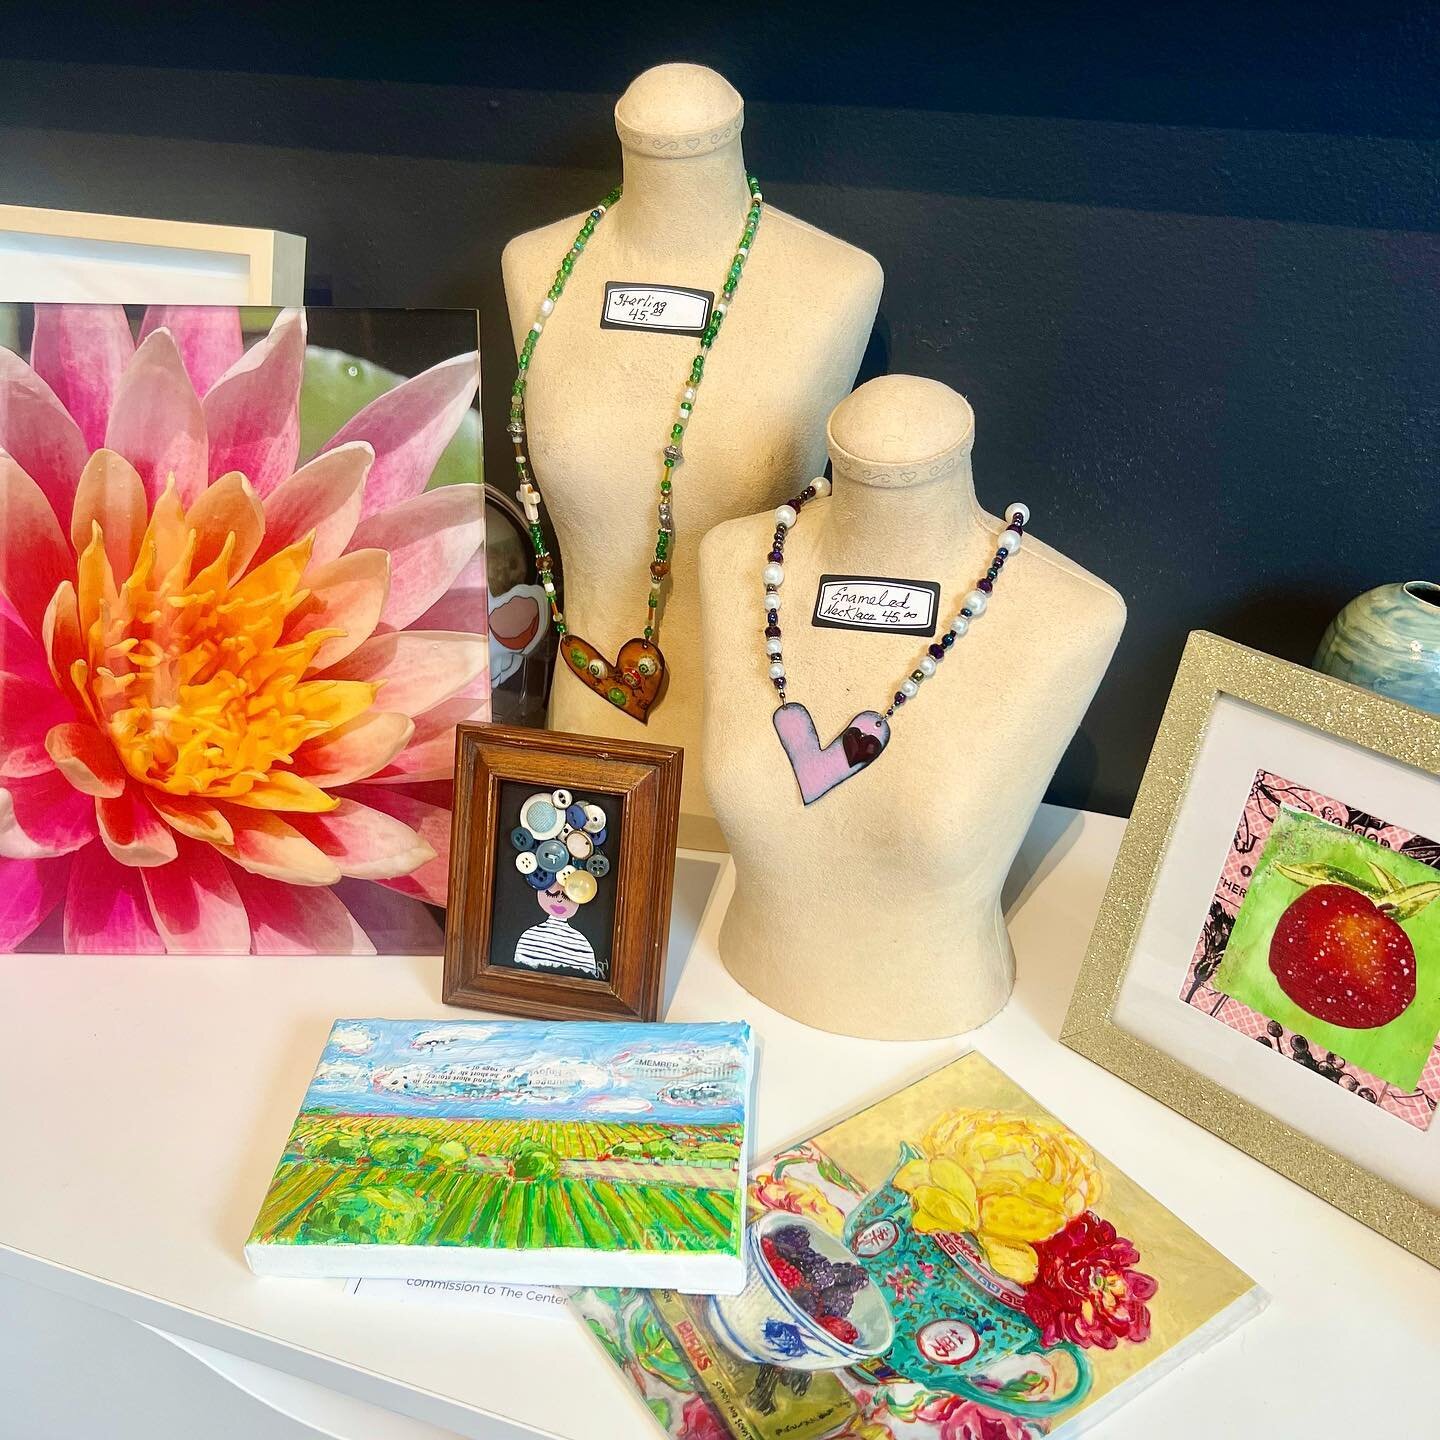 Mother&rsquo;s Day is this weekend! Come shop at the Center and support local artists. We&rsquo;ve got one-of-a-kind works of art for that special lady in your life!
&hellip;&hellip;
 #winwin #mothersday #mothersdaygift #buylocal #buylocalart #suppor